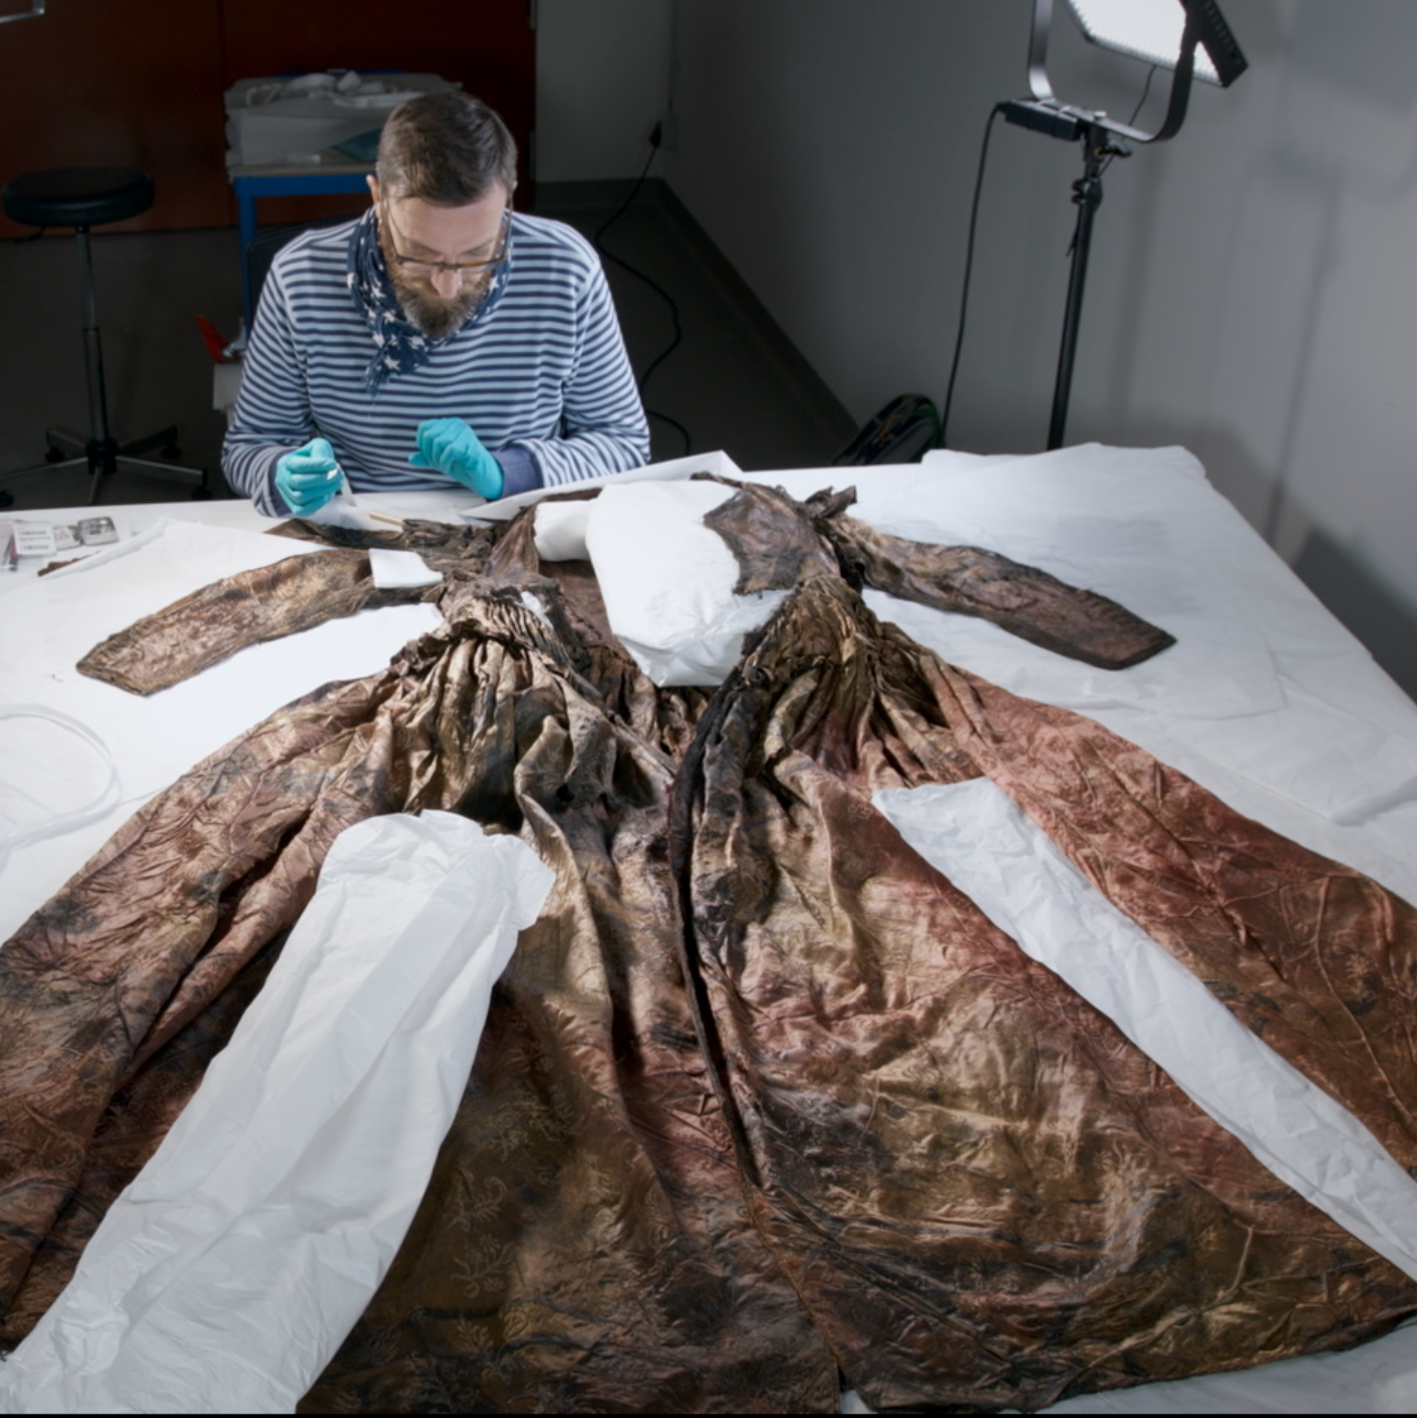 This Dress Survived for More Than Three Centuries at the Bottom of the Sea  - The New York Times